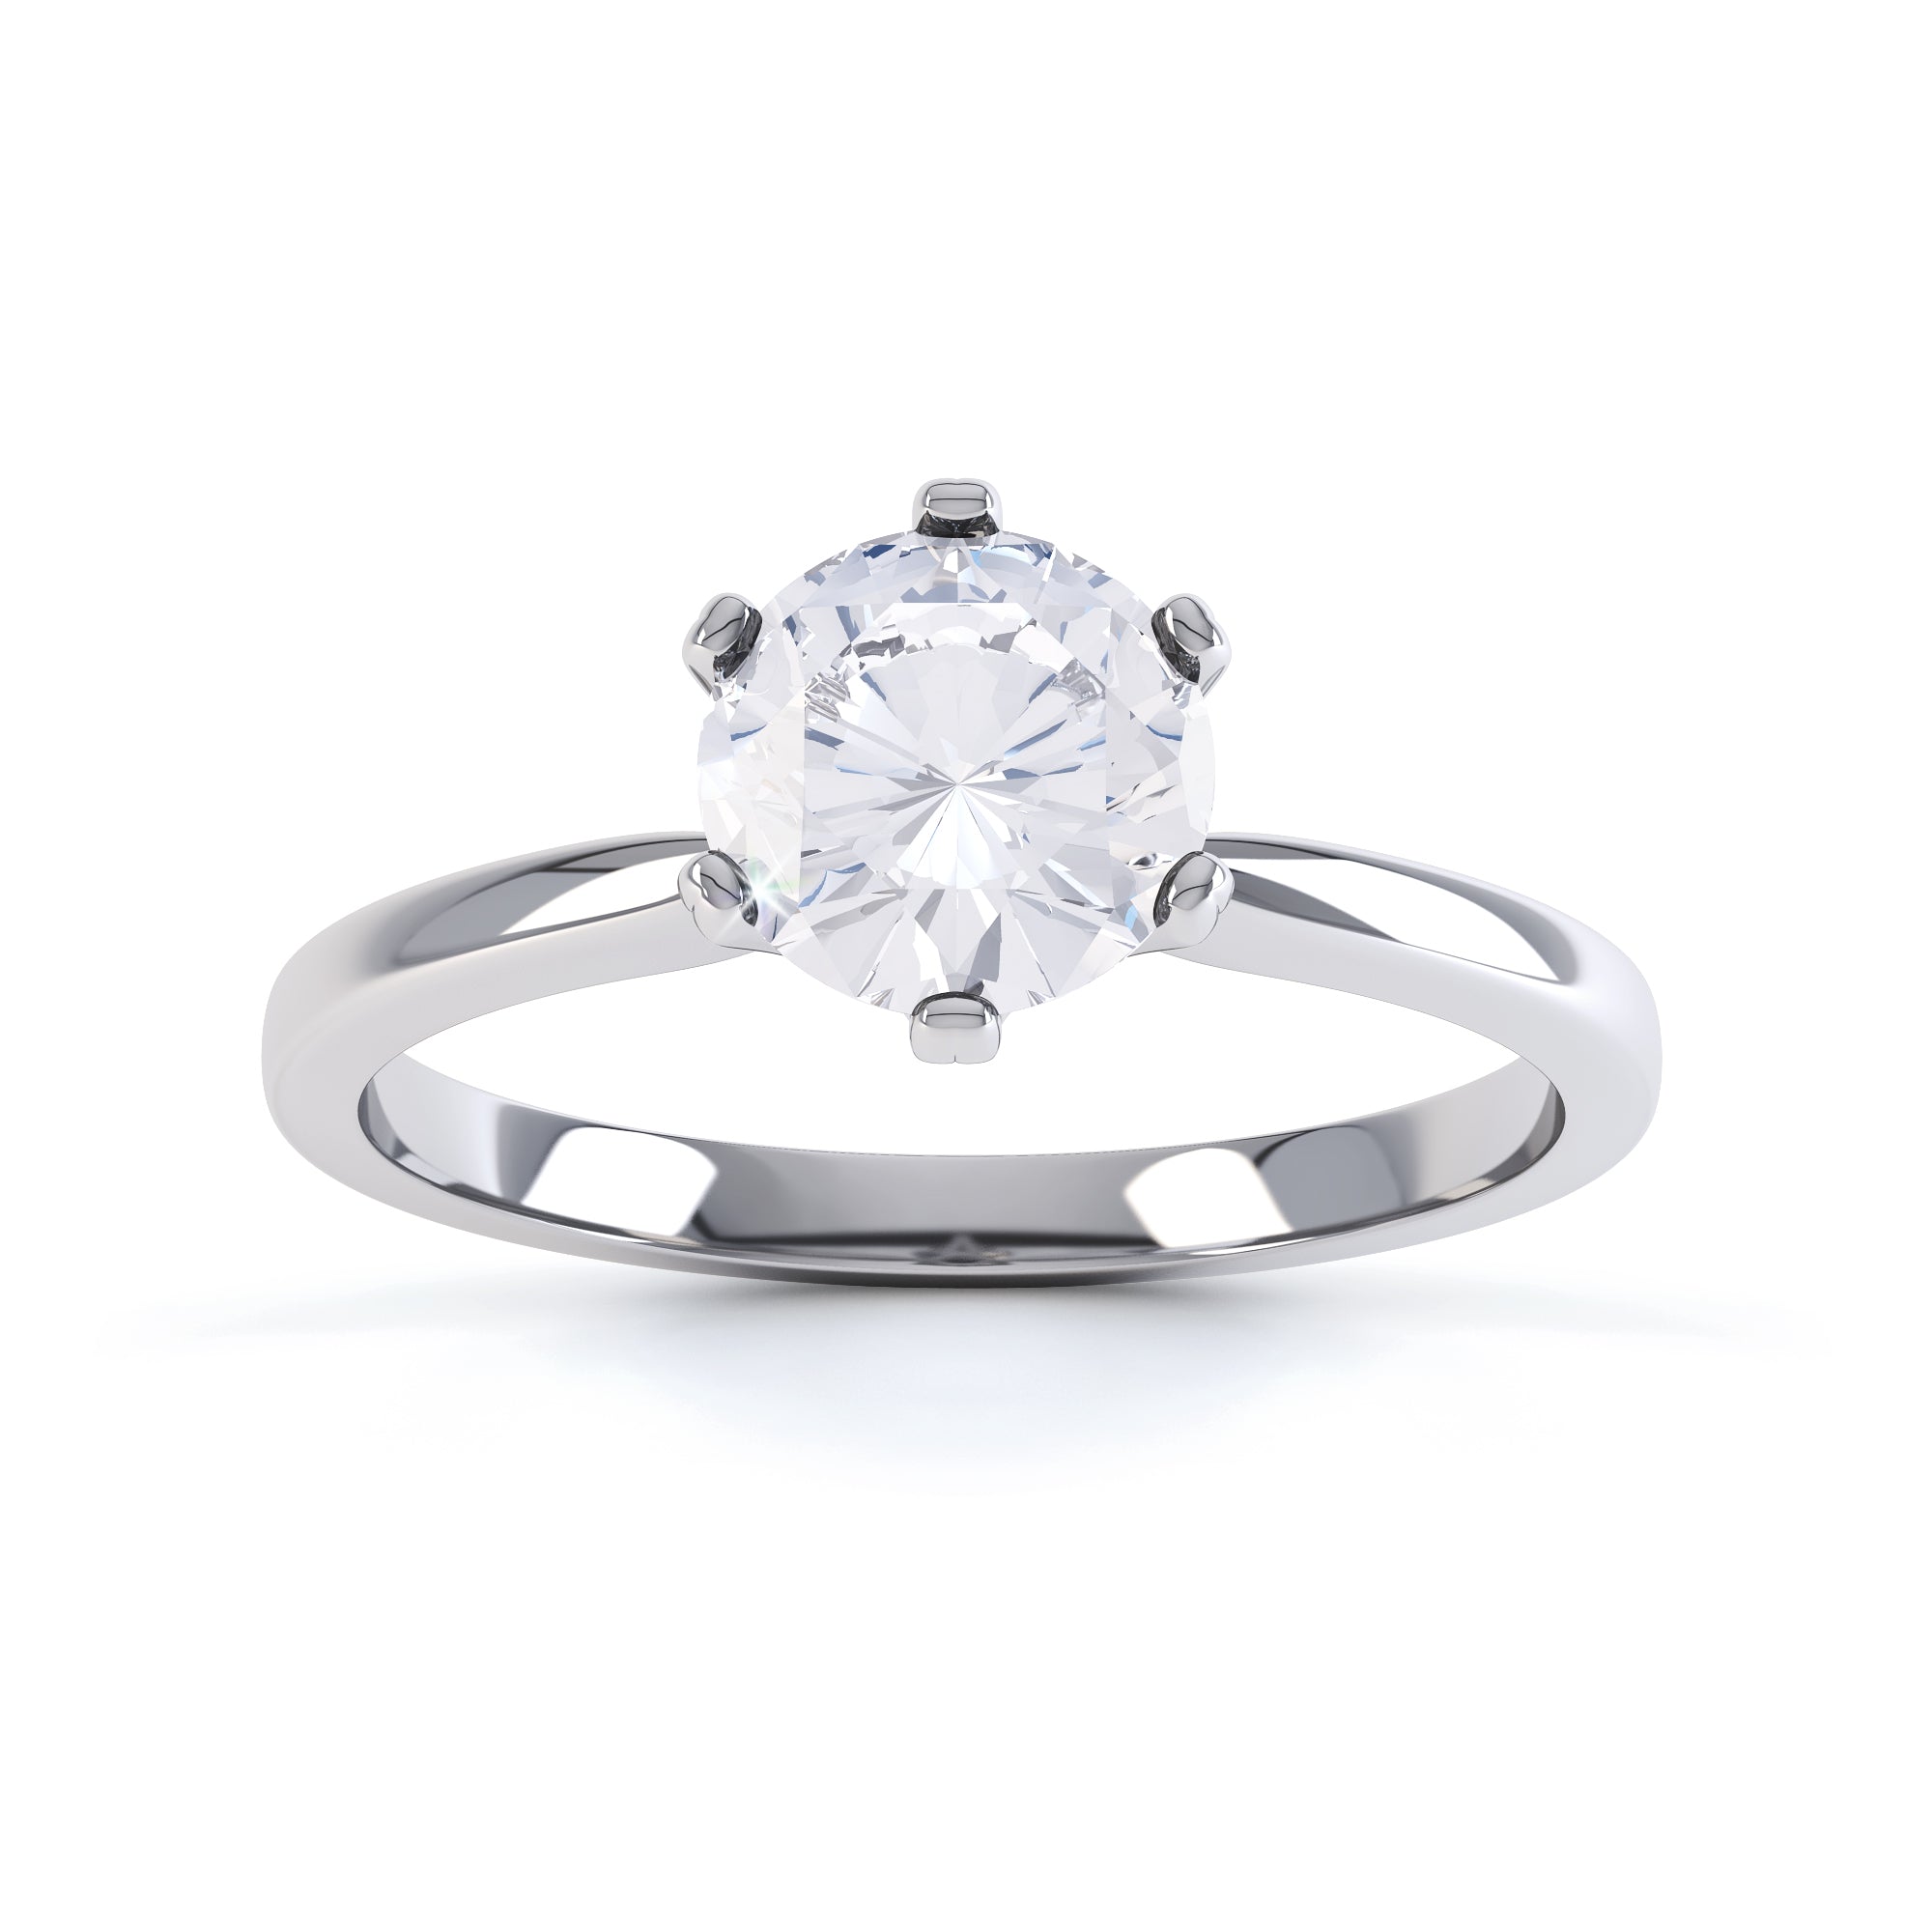 Round Brilliant Cut Centre Stone, Six Claw, Knife edge Shoulders, Diamond Engagement Ring